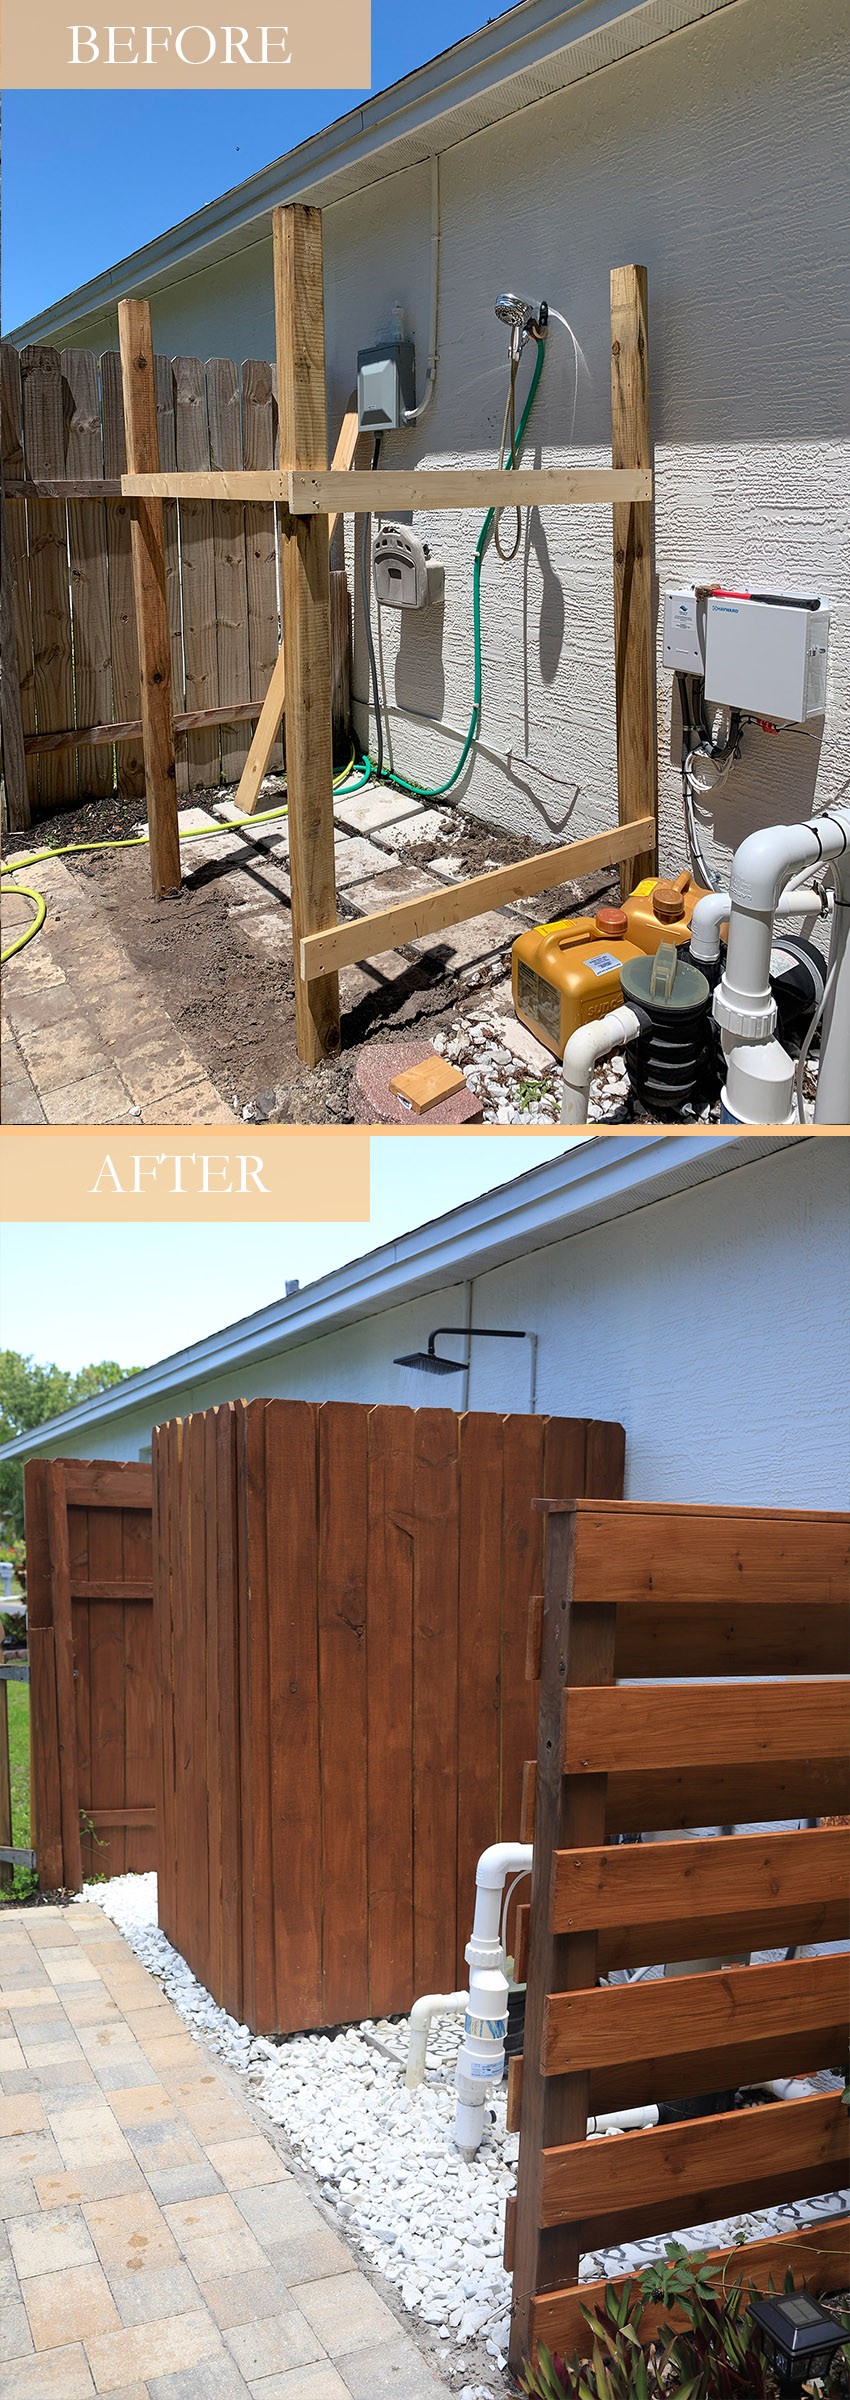 DIY Outdoor Shower Ideas on a Budget for the Ultimate Backyard Oasis Before and After | DIY Outdoor Shower by popular Florida DIY blog, Fresh Mommy Blog: Before and After image of a DIY outdoor shower.